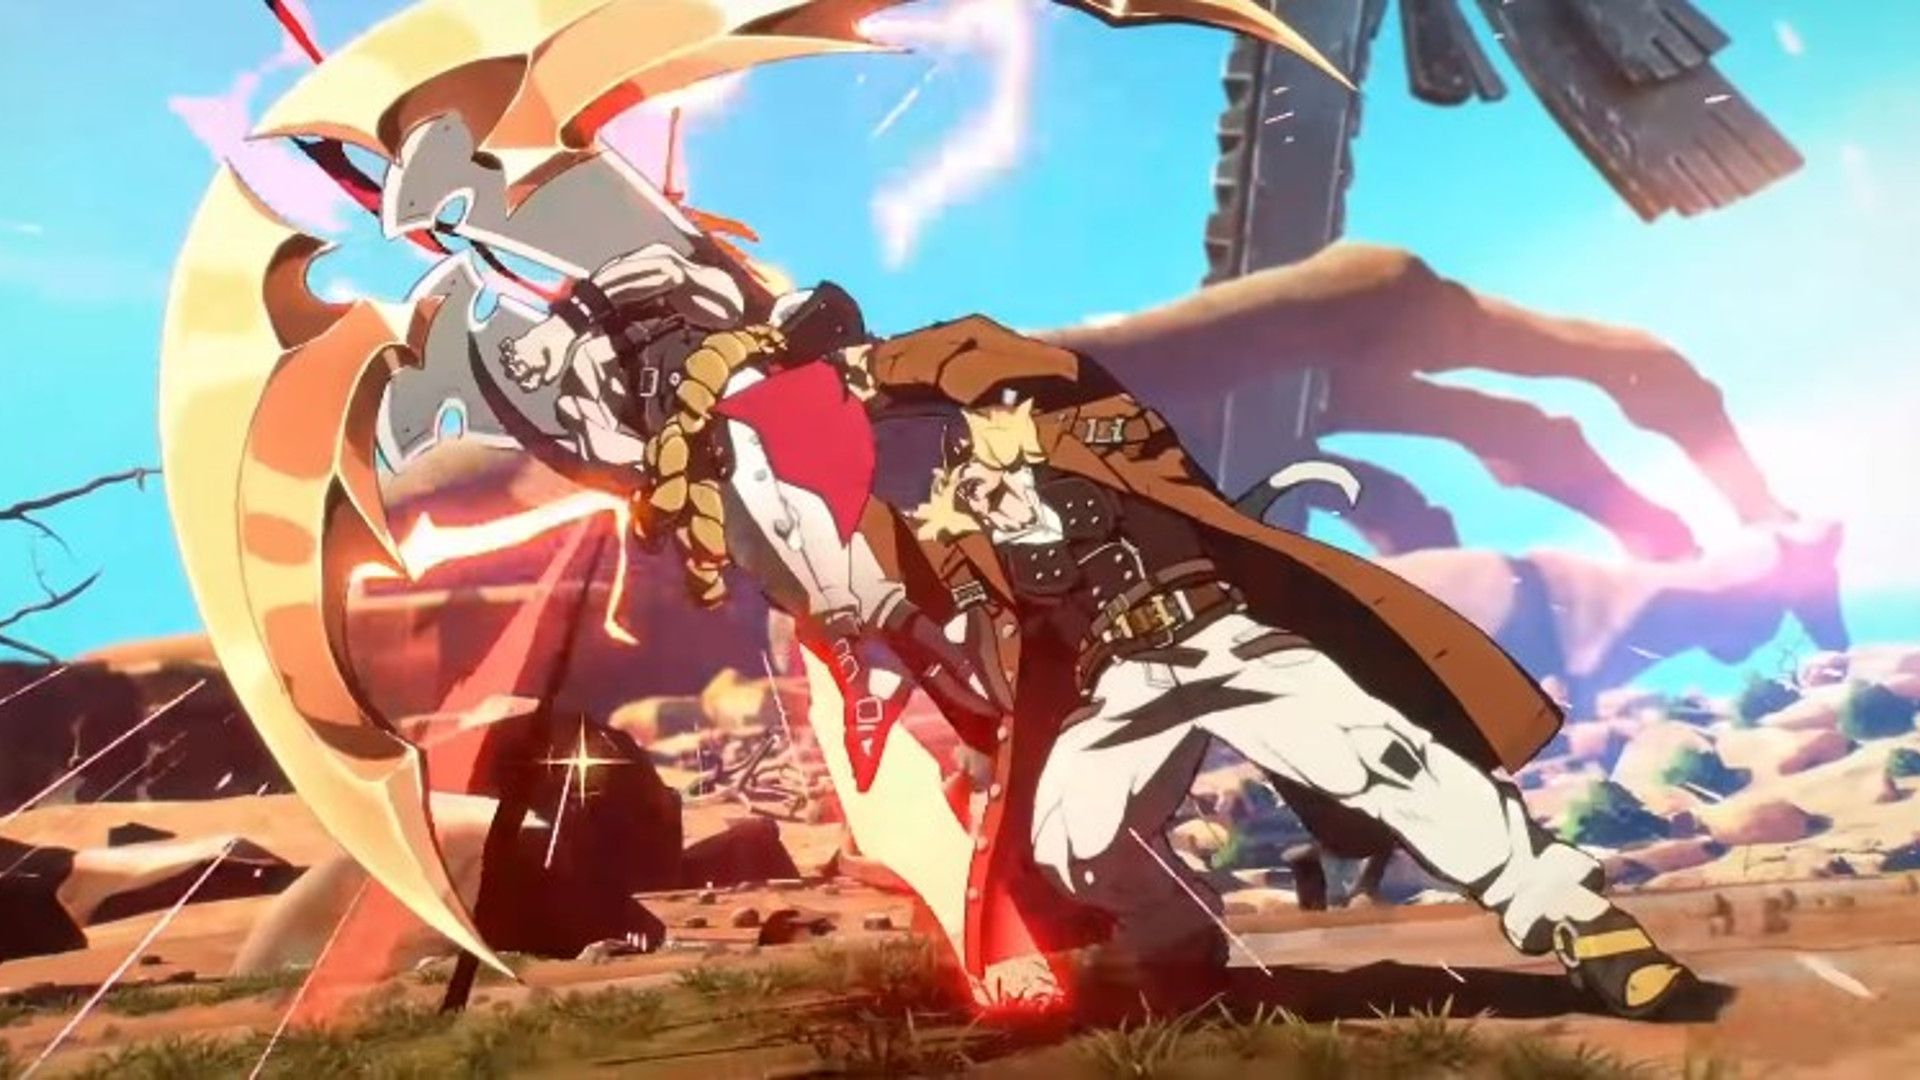 Guilty Gear Strive is coming to Steam “early 2021”